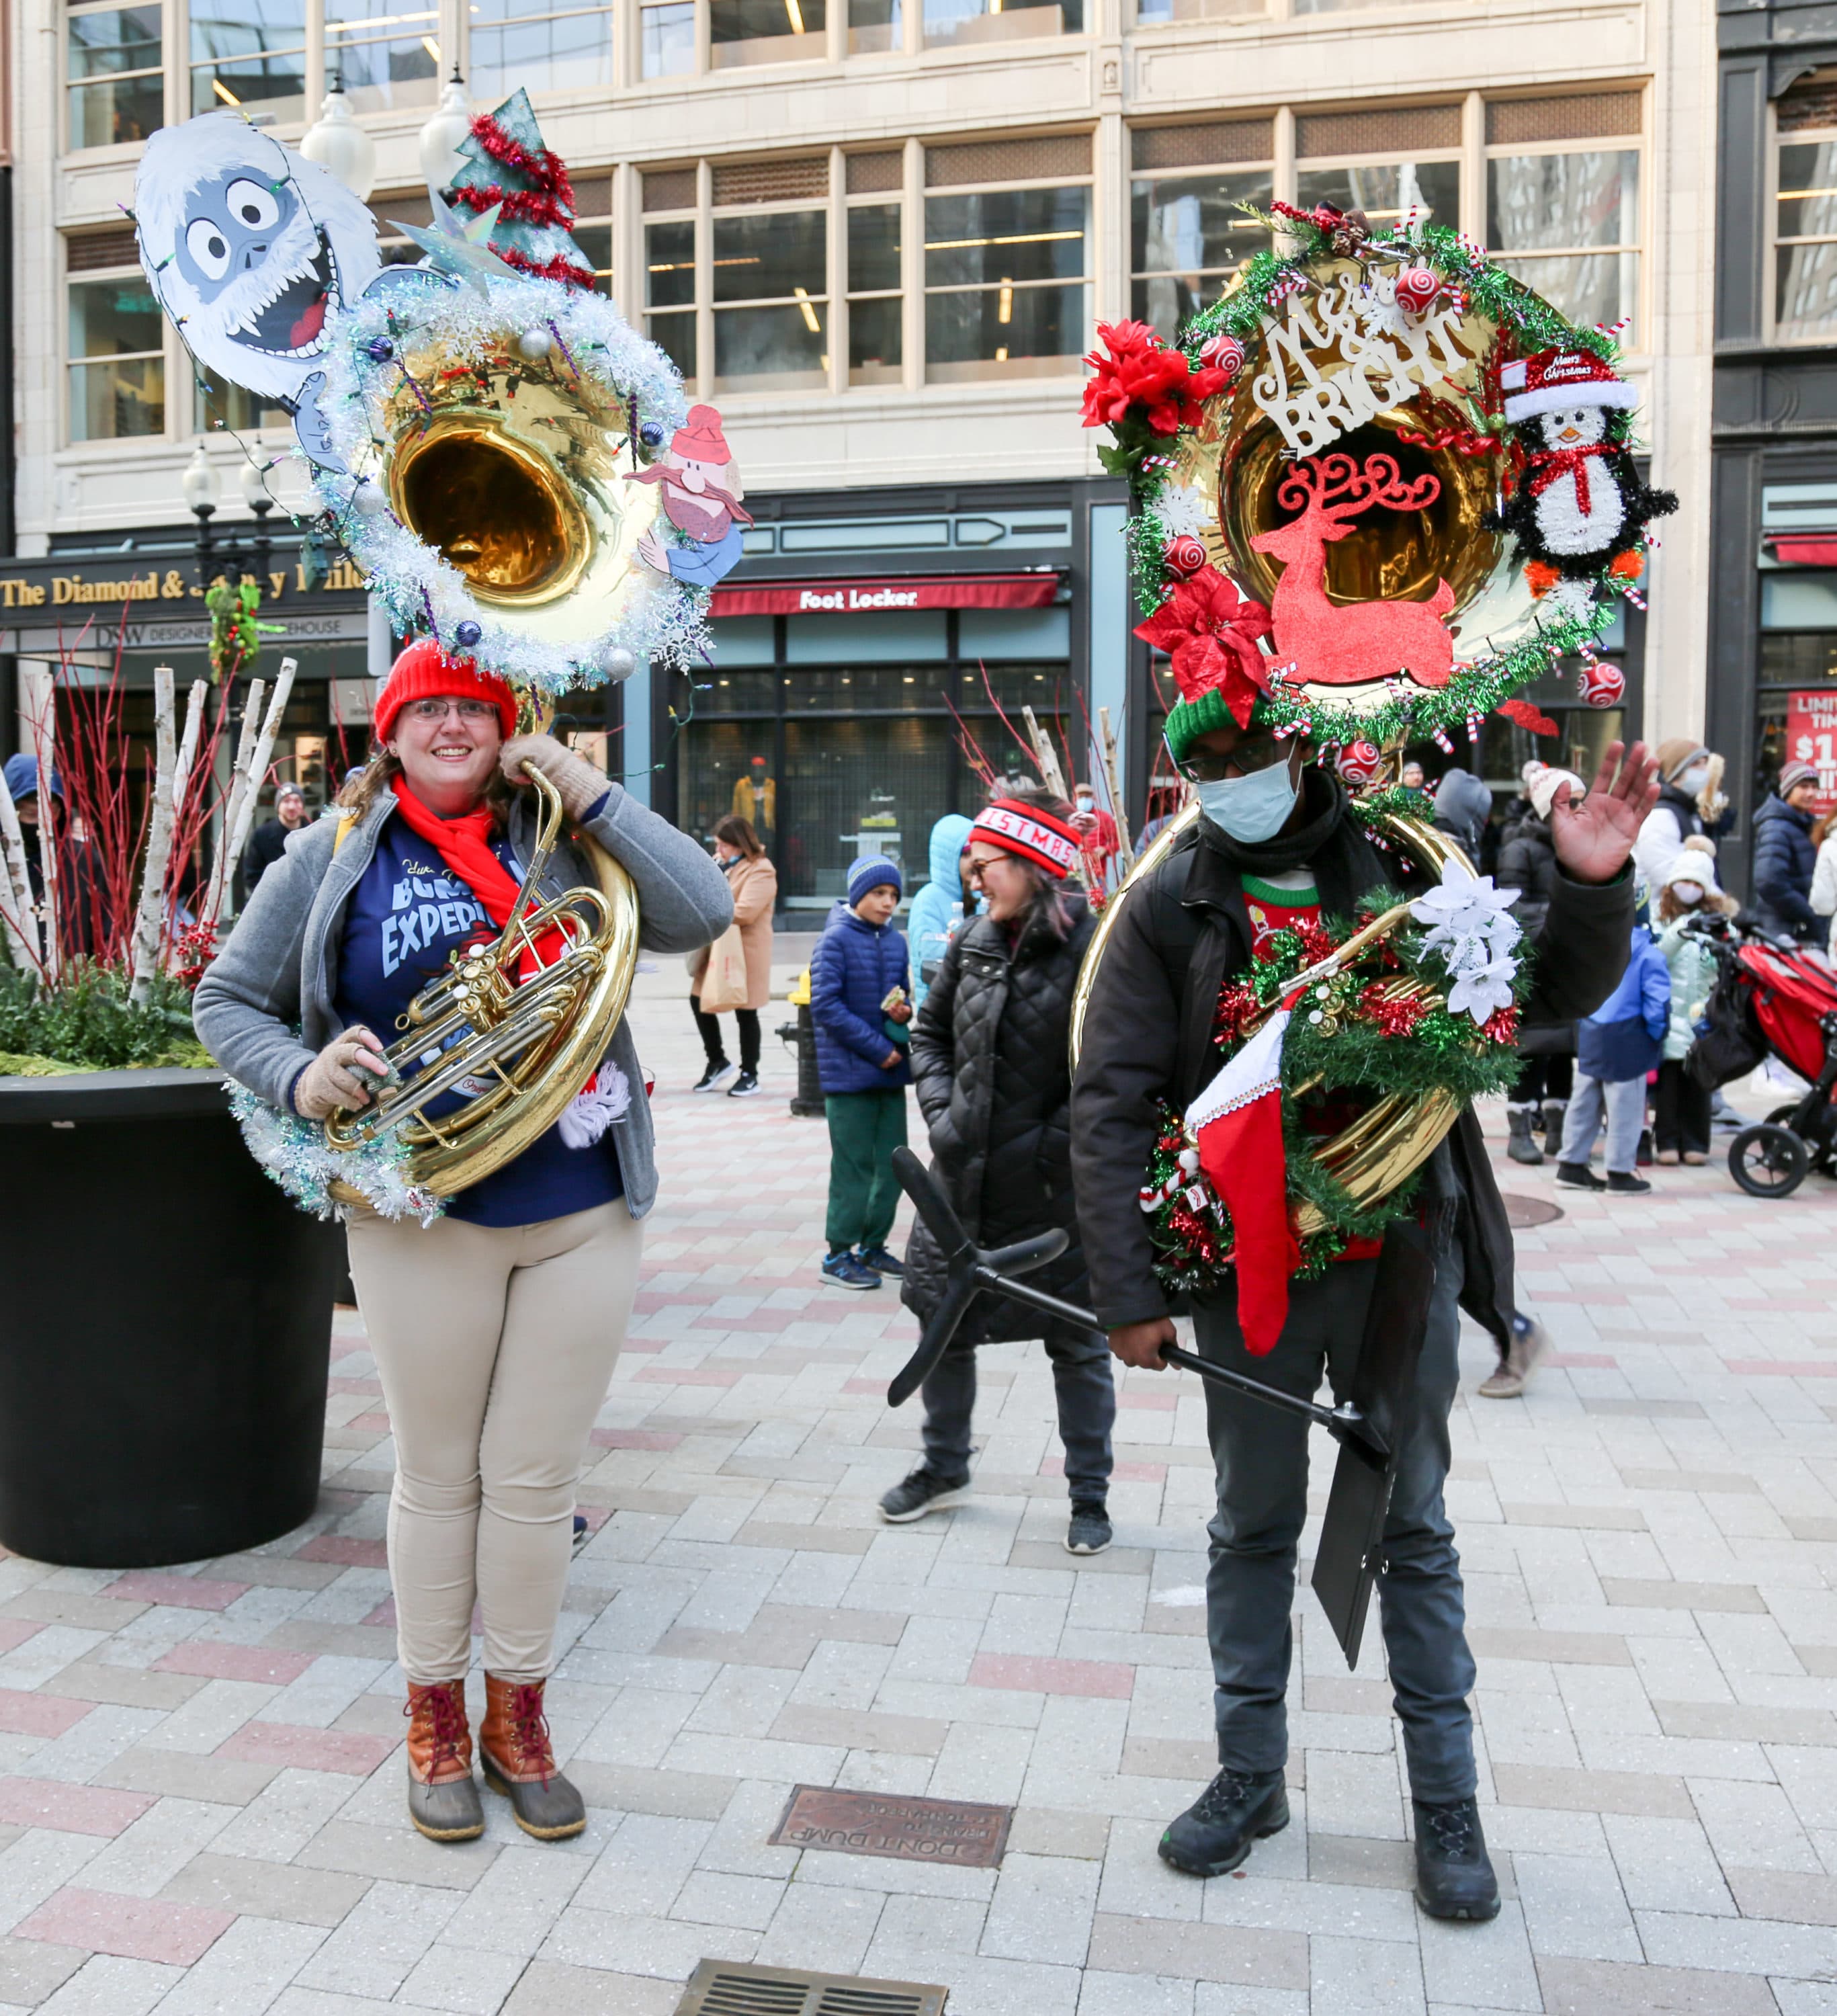 'Tis the season for 'TubaChristmas,' a low brass love fest in Boston